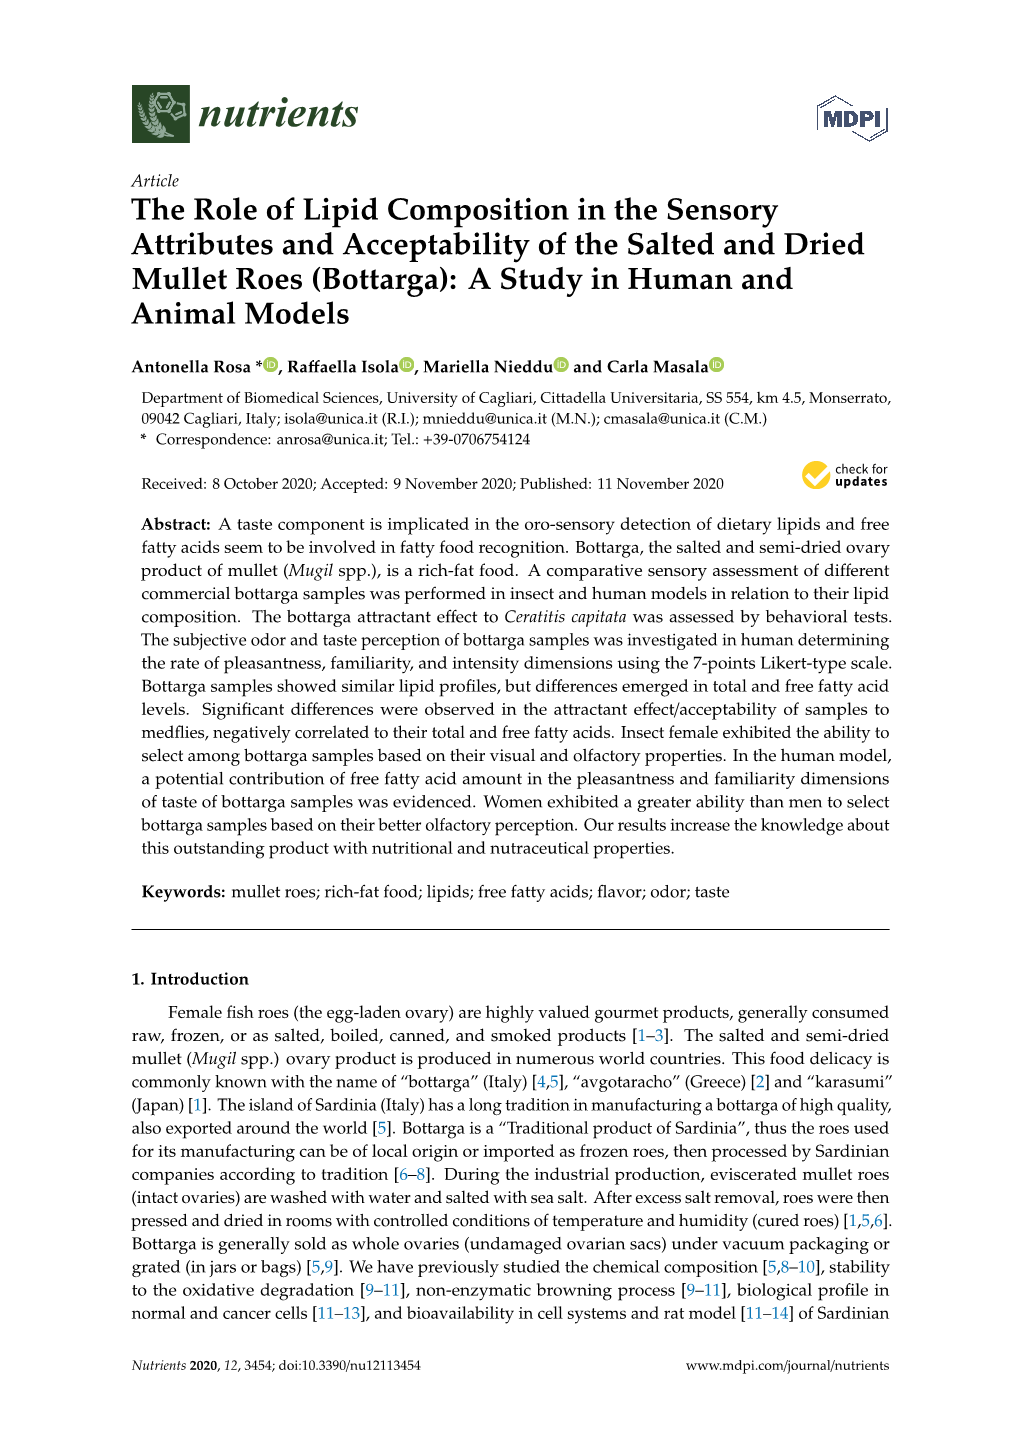 The Role of Lipid Composition in the Sensory Attributes and Acceptability of the Salted and Dried Mullet Roes (Bottarga): a Study in Human and Animal Models